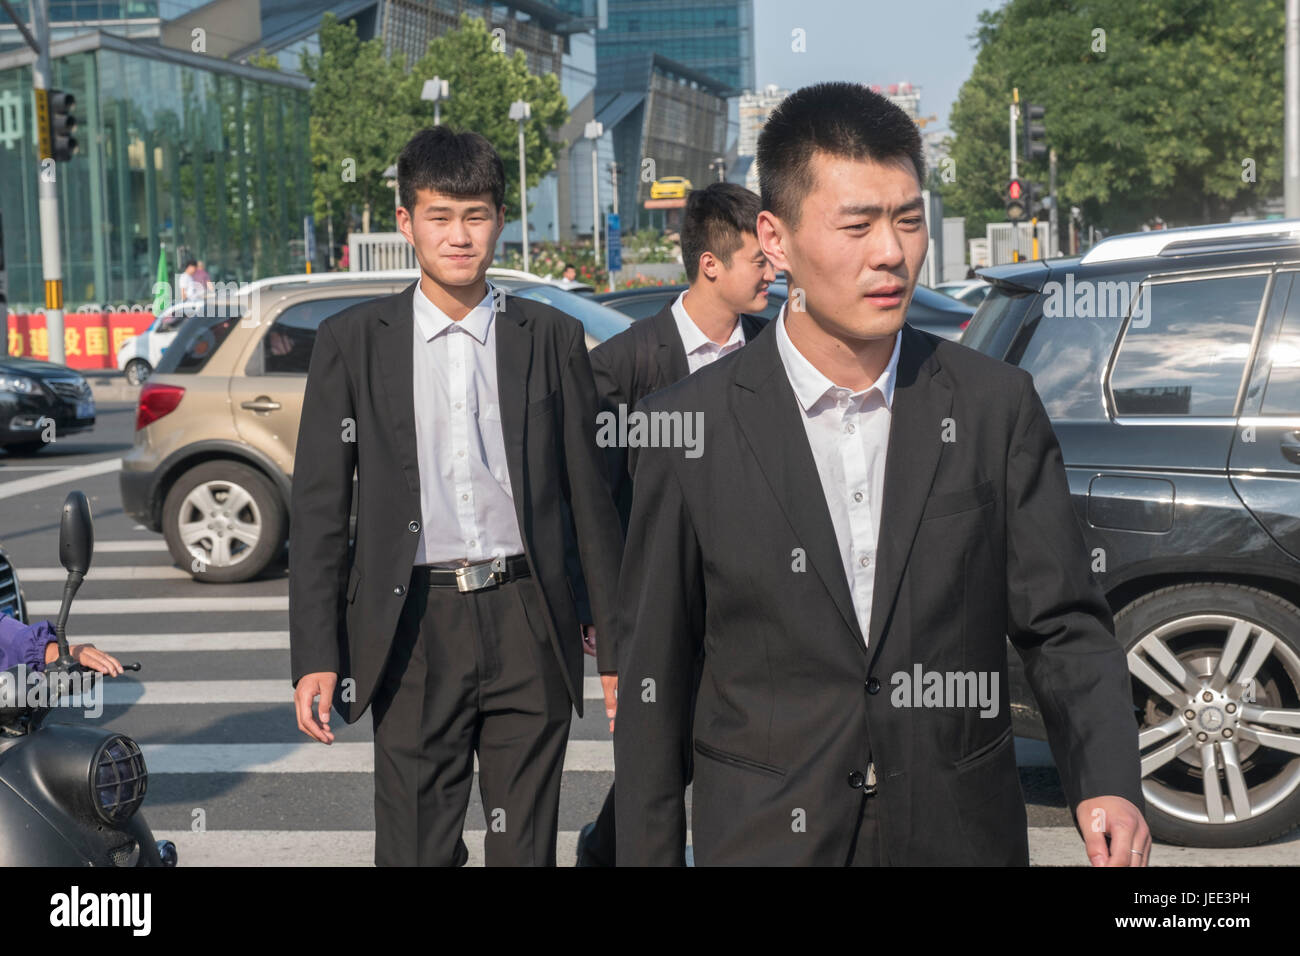 Chinese men wear suits on the street in Beijing, China. Stock Photo